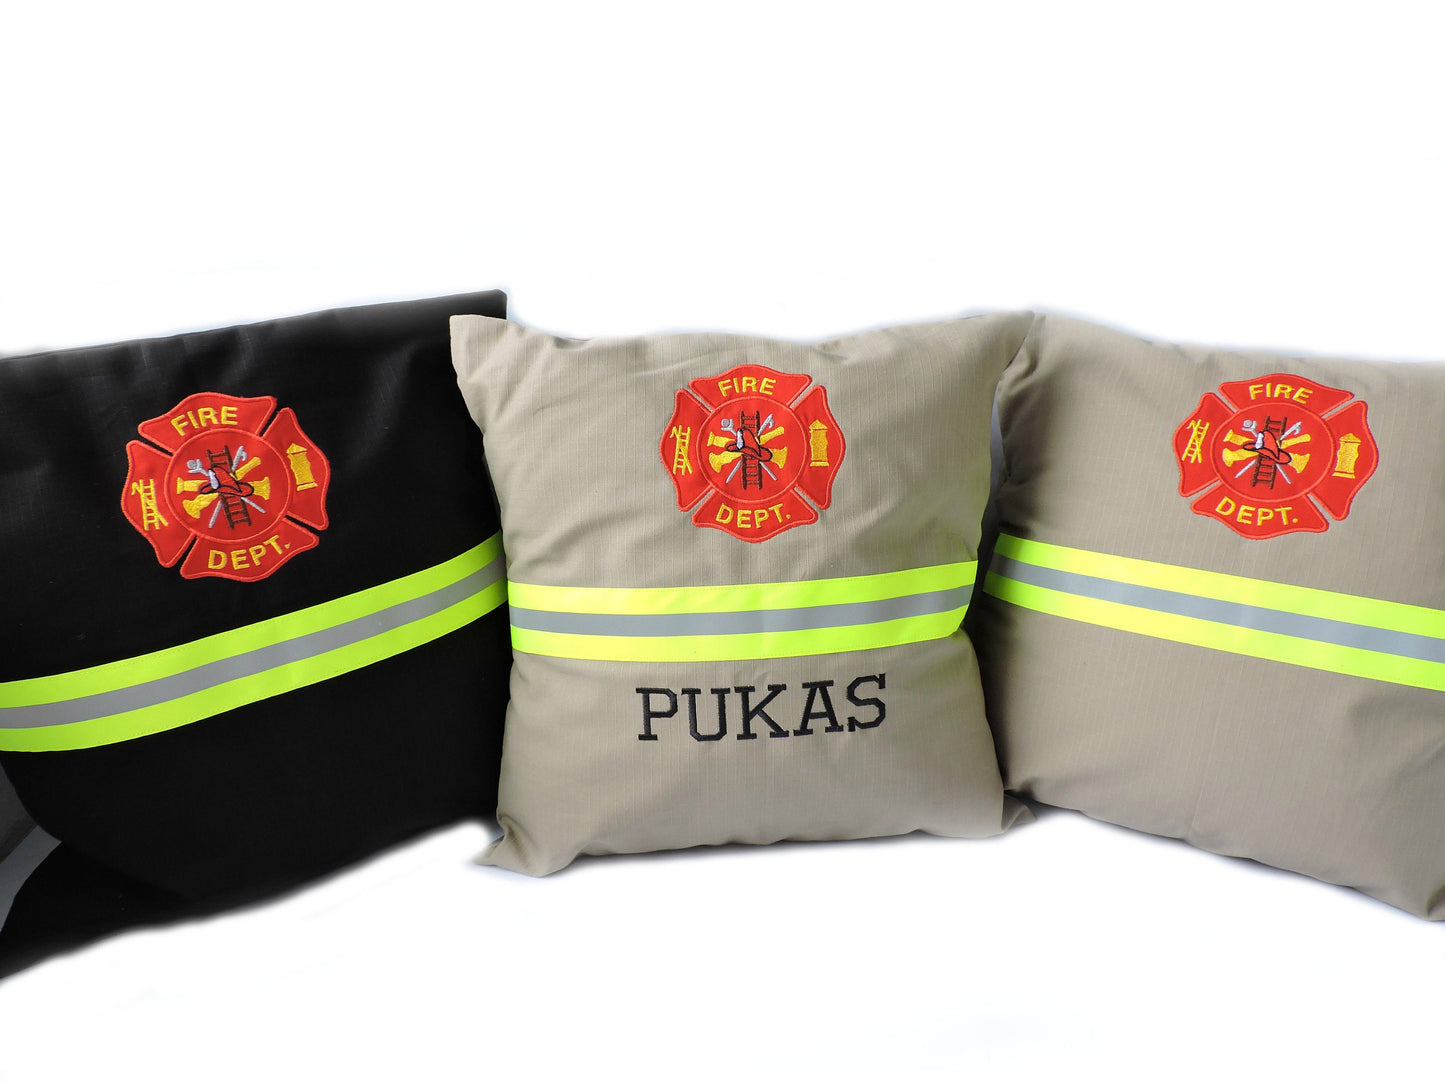 Firefighter pillow cover with maltese cross